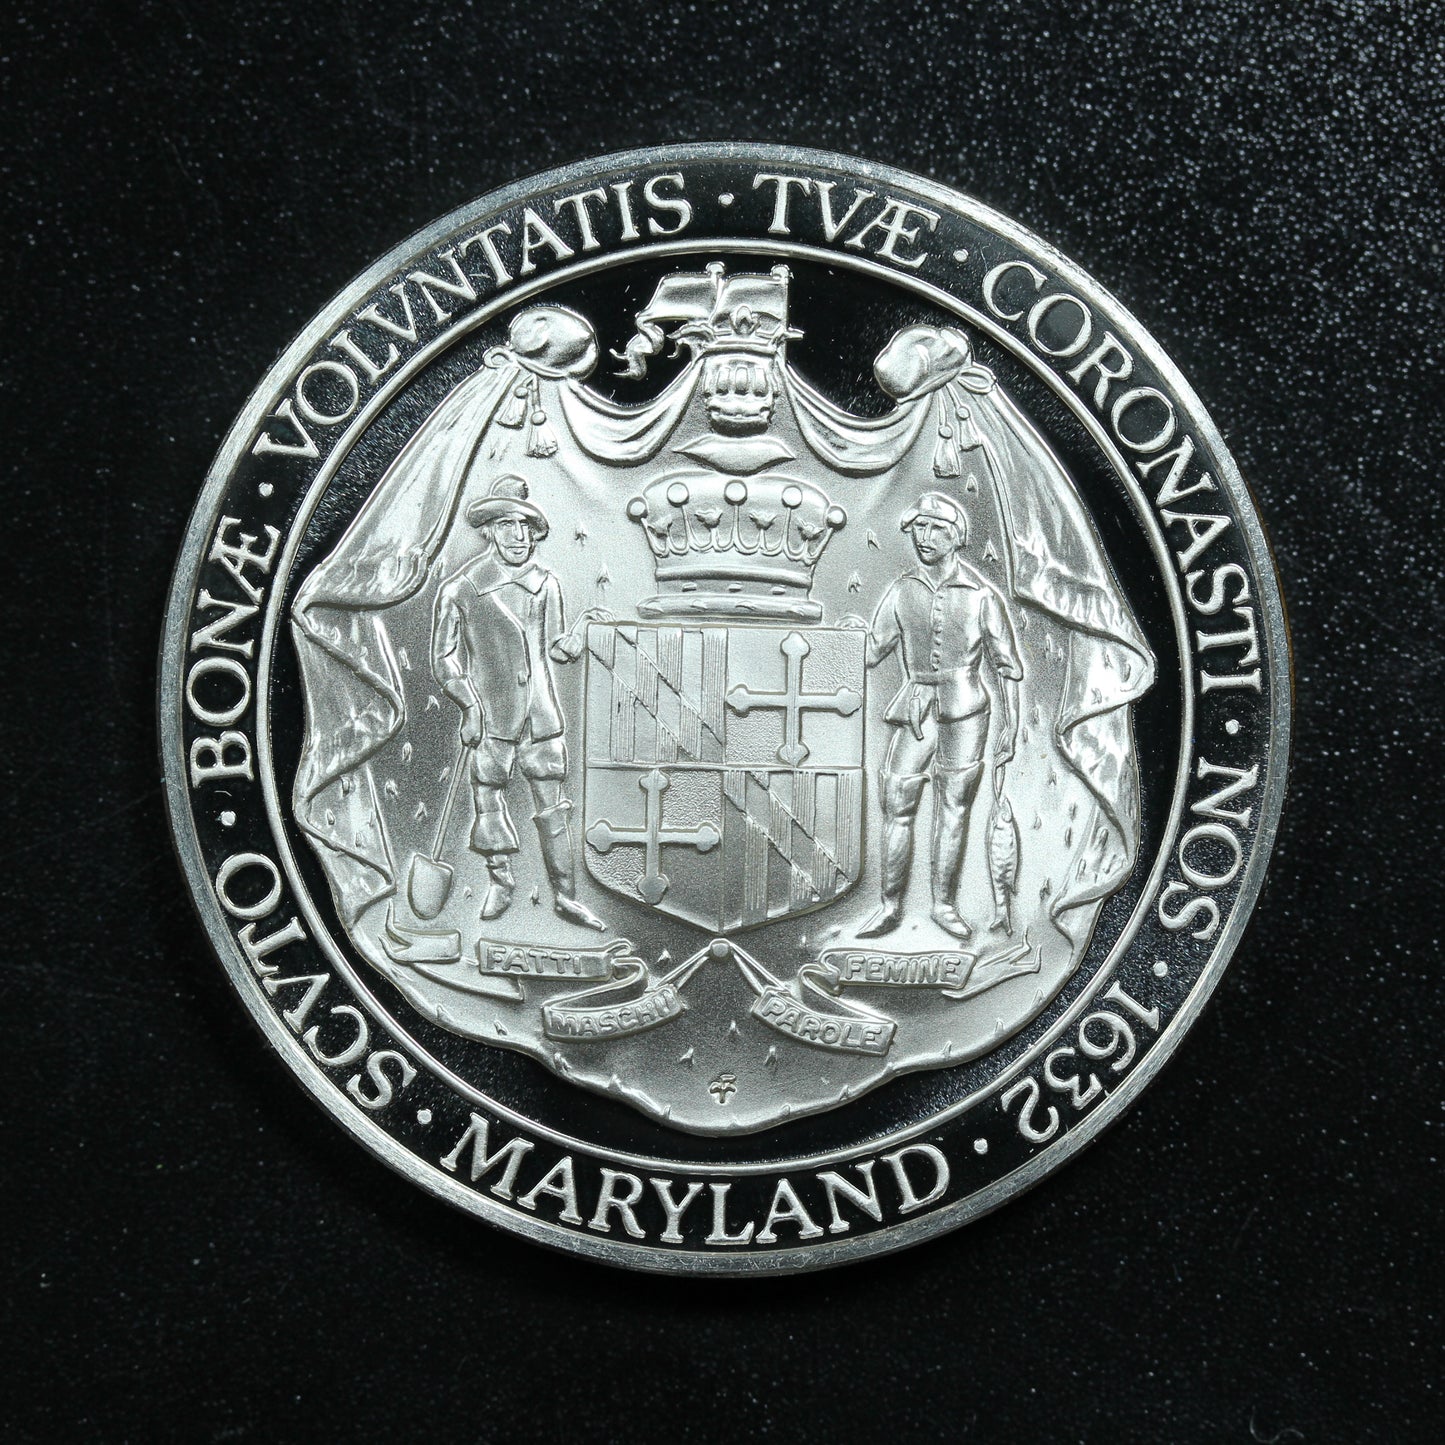 Franklin Mint 50 State Bicentennial Medal - MARYLAND Sterling Silver Proof w/ Capsule